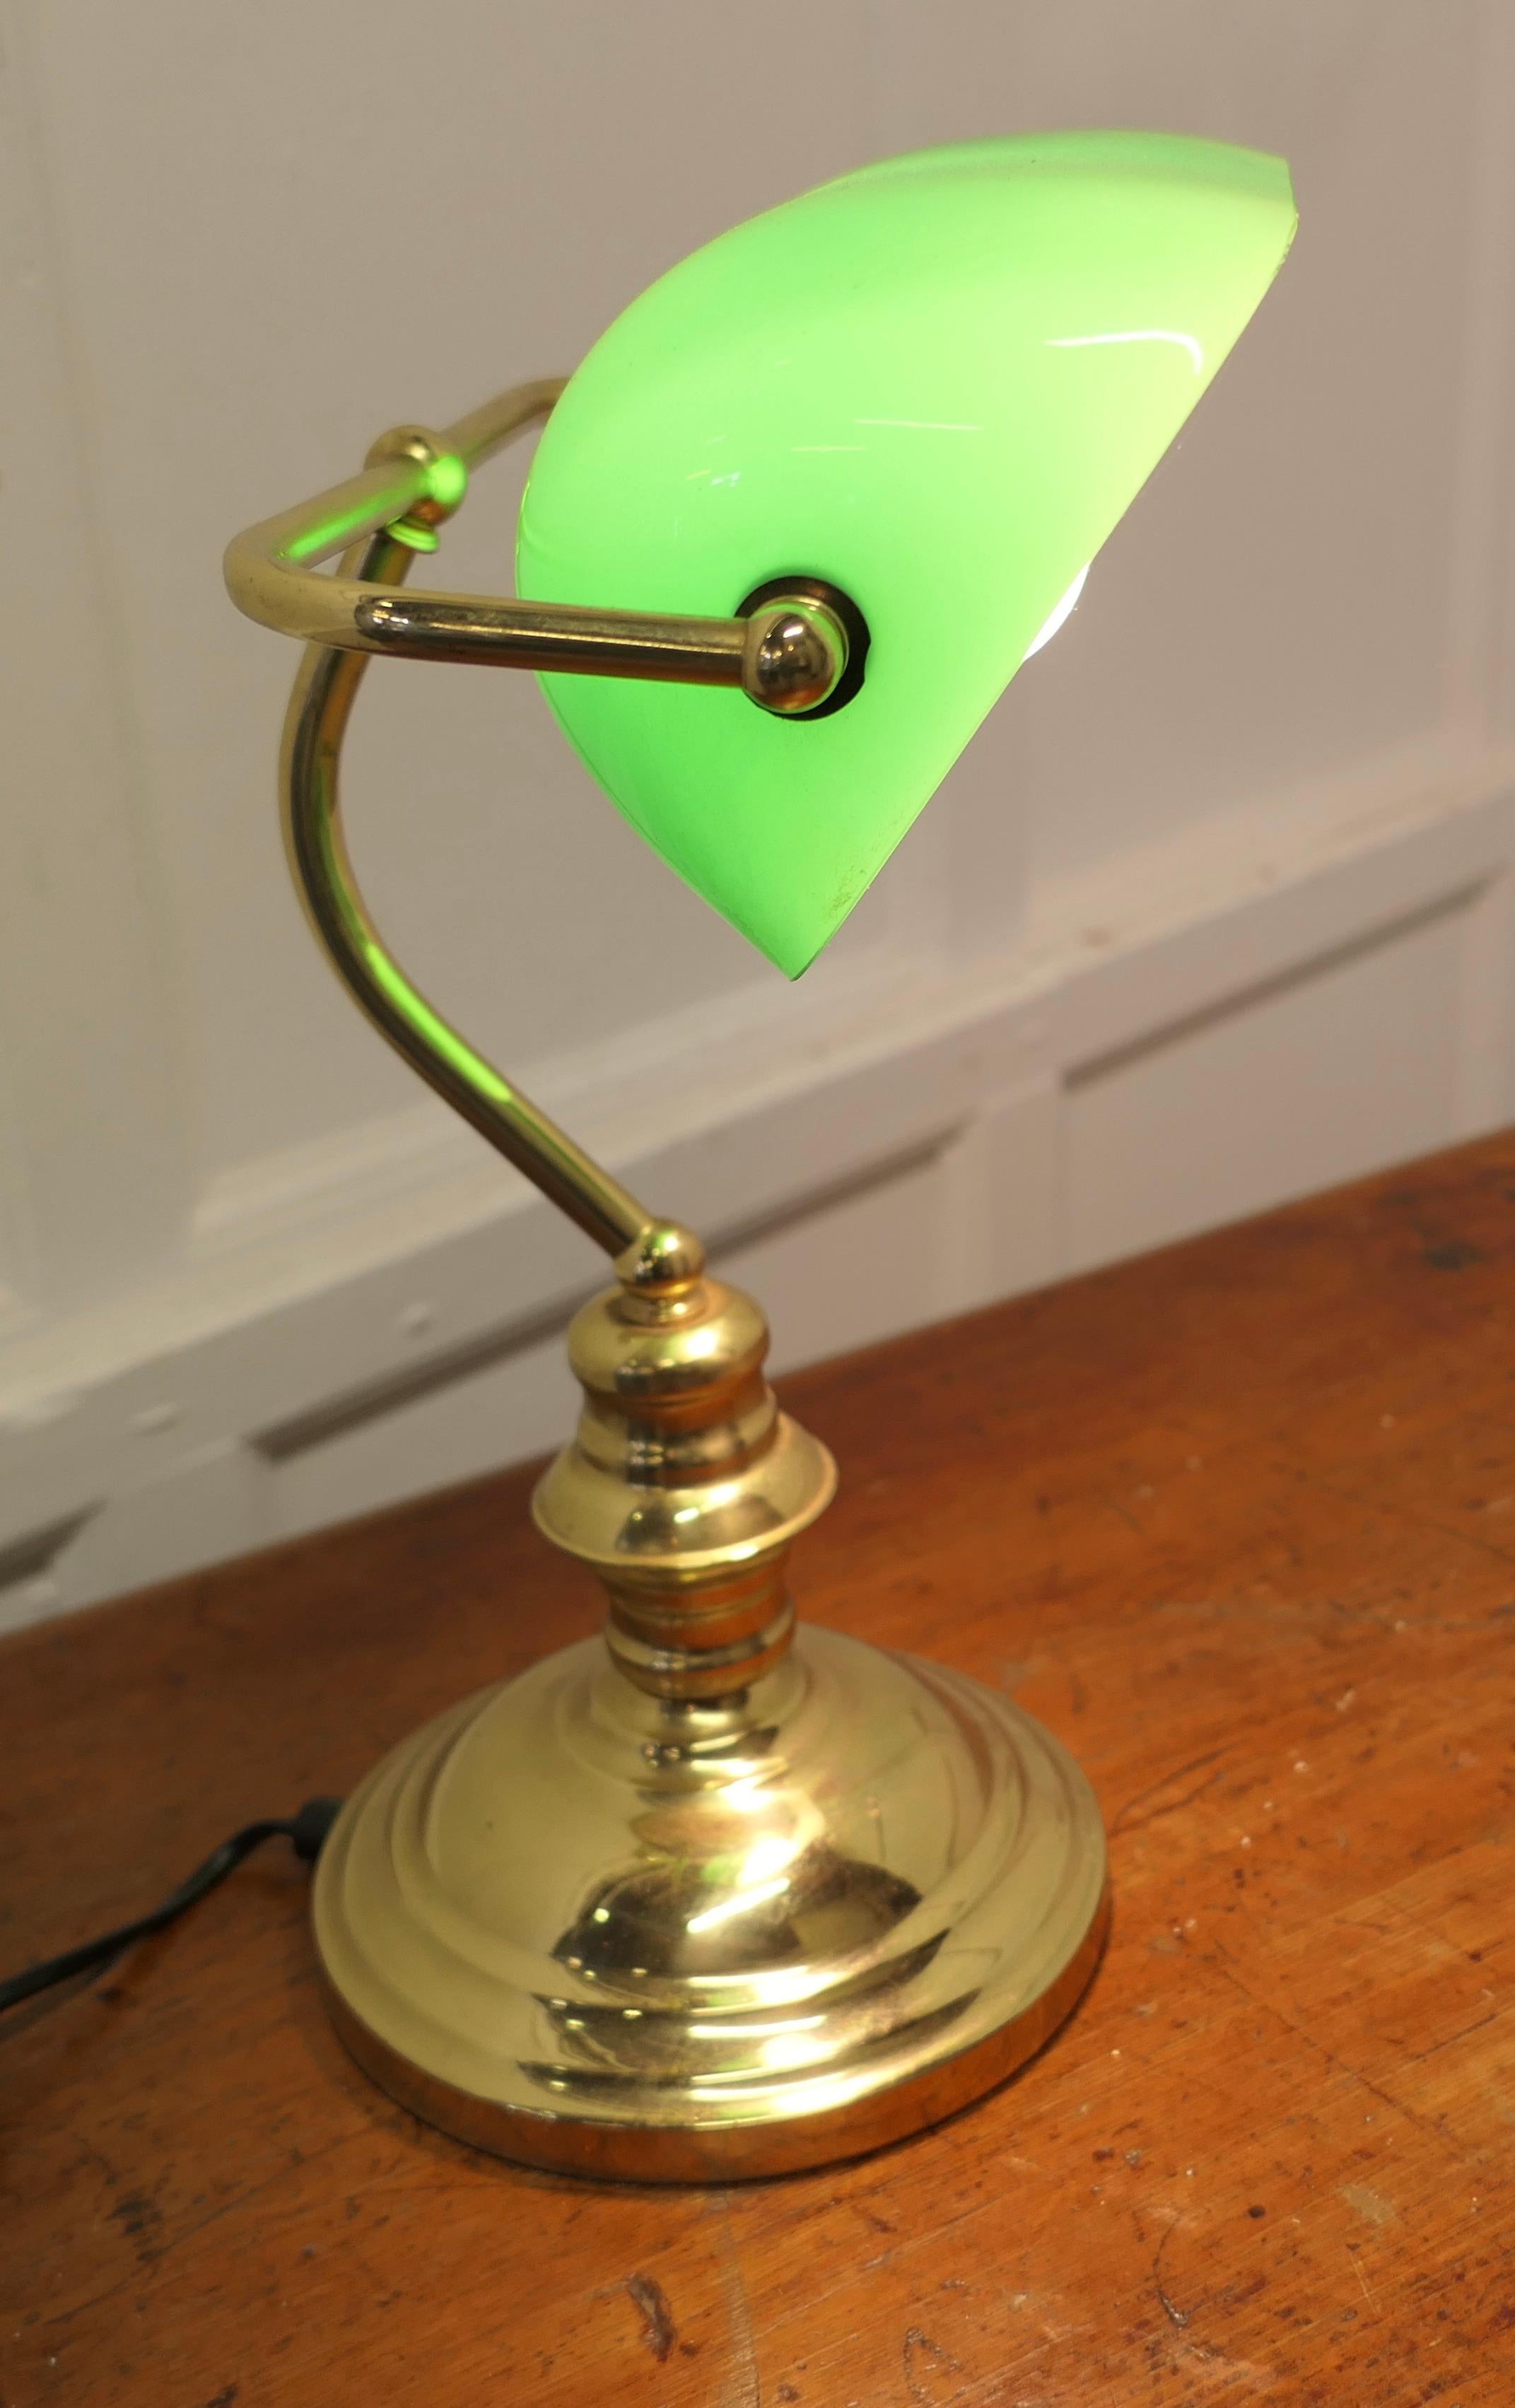 Brass and Green Glass Banker’s Desk Lamp

A beautiful quality fully adjustable early Banker or Barrister’s brass desk lamp, with a green glass lampshade which has a white reflective underside 
The Lamp is in good and working condition

The lamp is